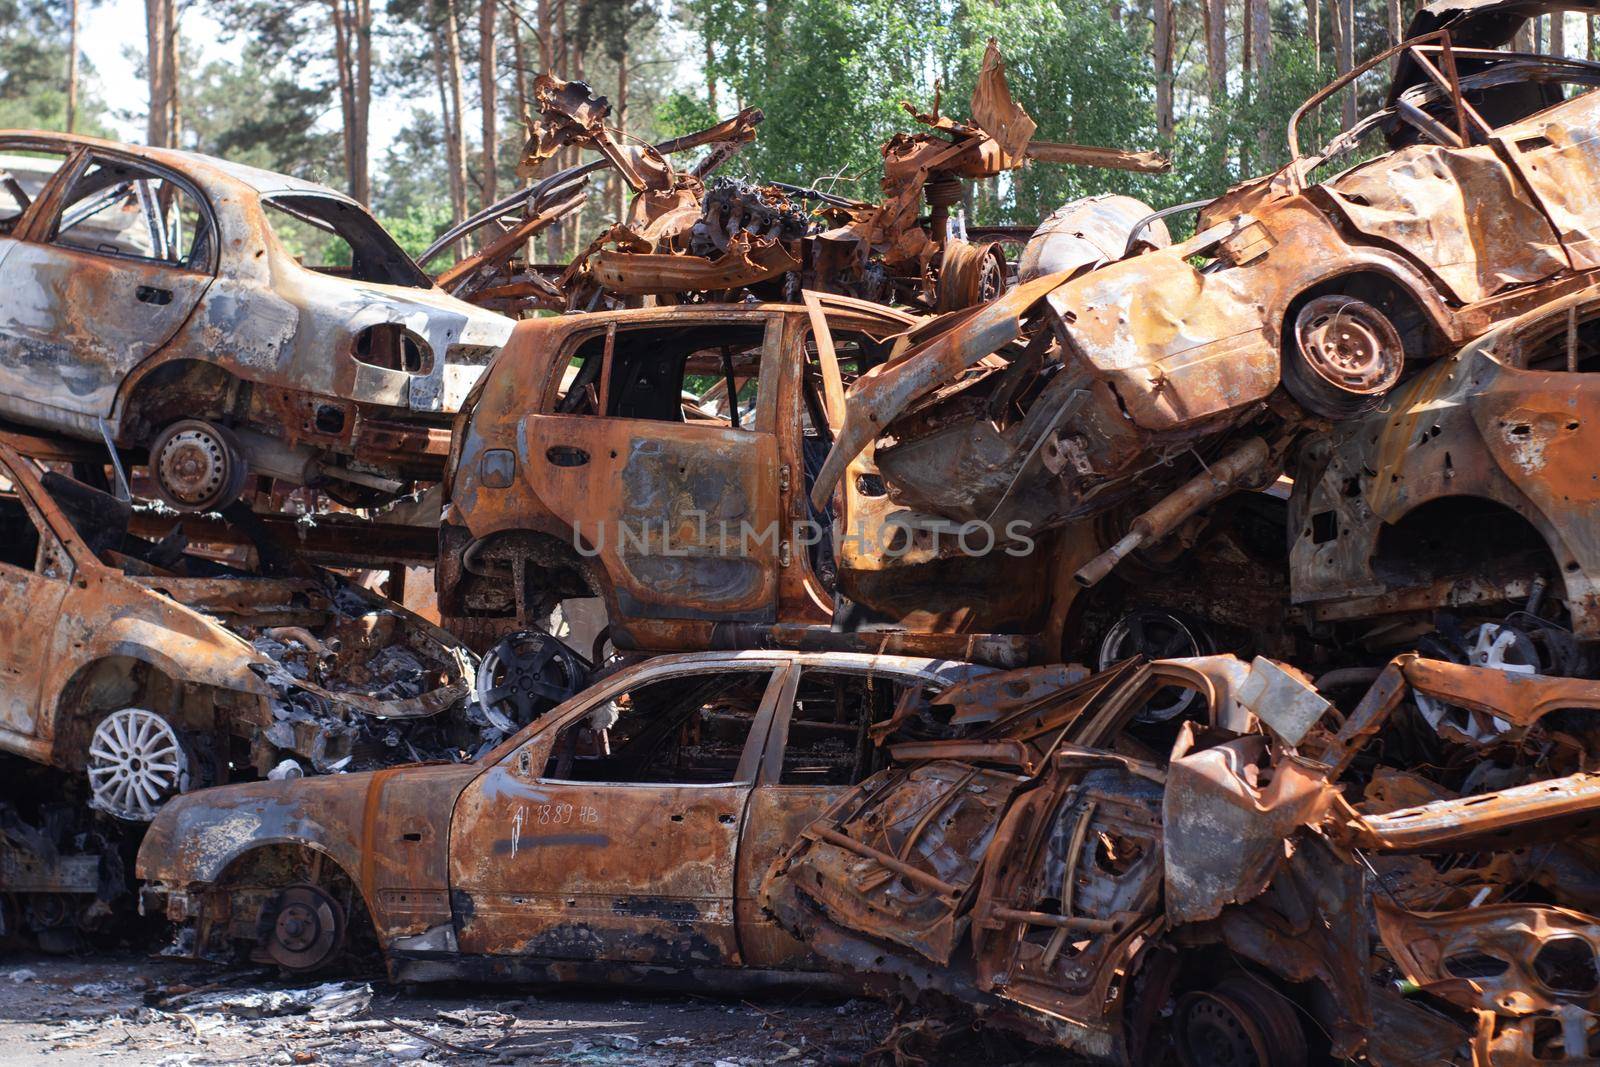 war in ukraine. Car graveyard. Shot cars of civilians. russia's war against Ukraine. Burnt and blown up car. Cars damaged after shelling. irpin bucha. war crimes by oliavesna